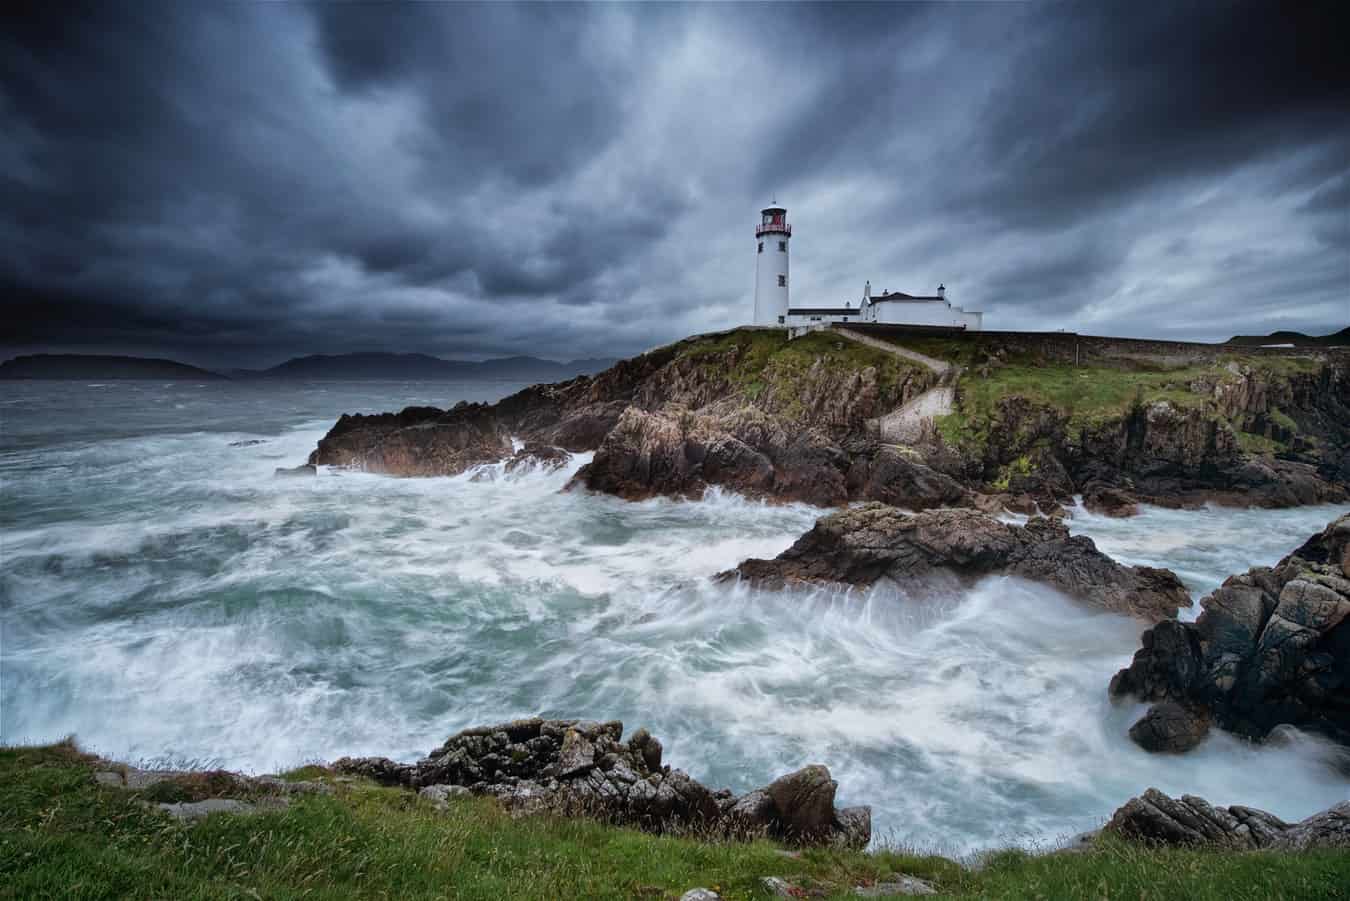 fanad head lighthouse Fanad Head lighthouse was first built back in 1812, after a devastating shipwreck of HMS Saldanha which identified the need for a lighthouse within the area to prevent further incidents happening. 